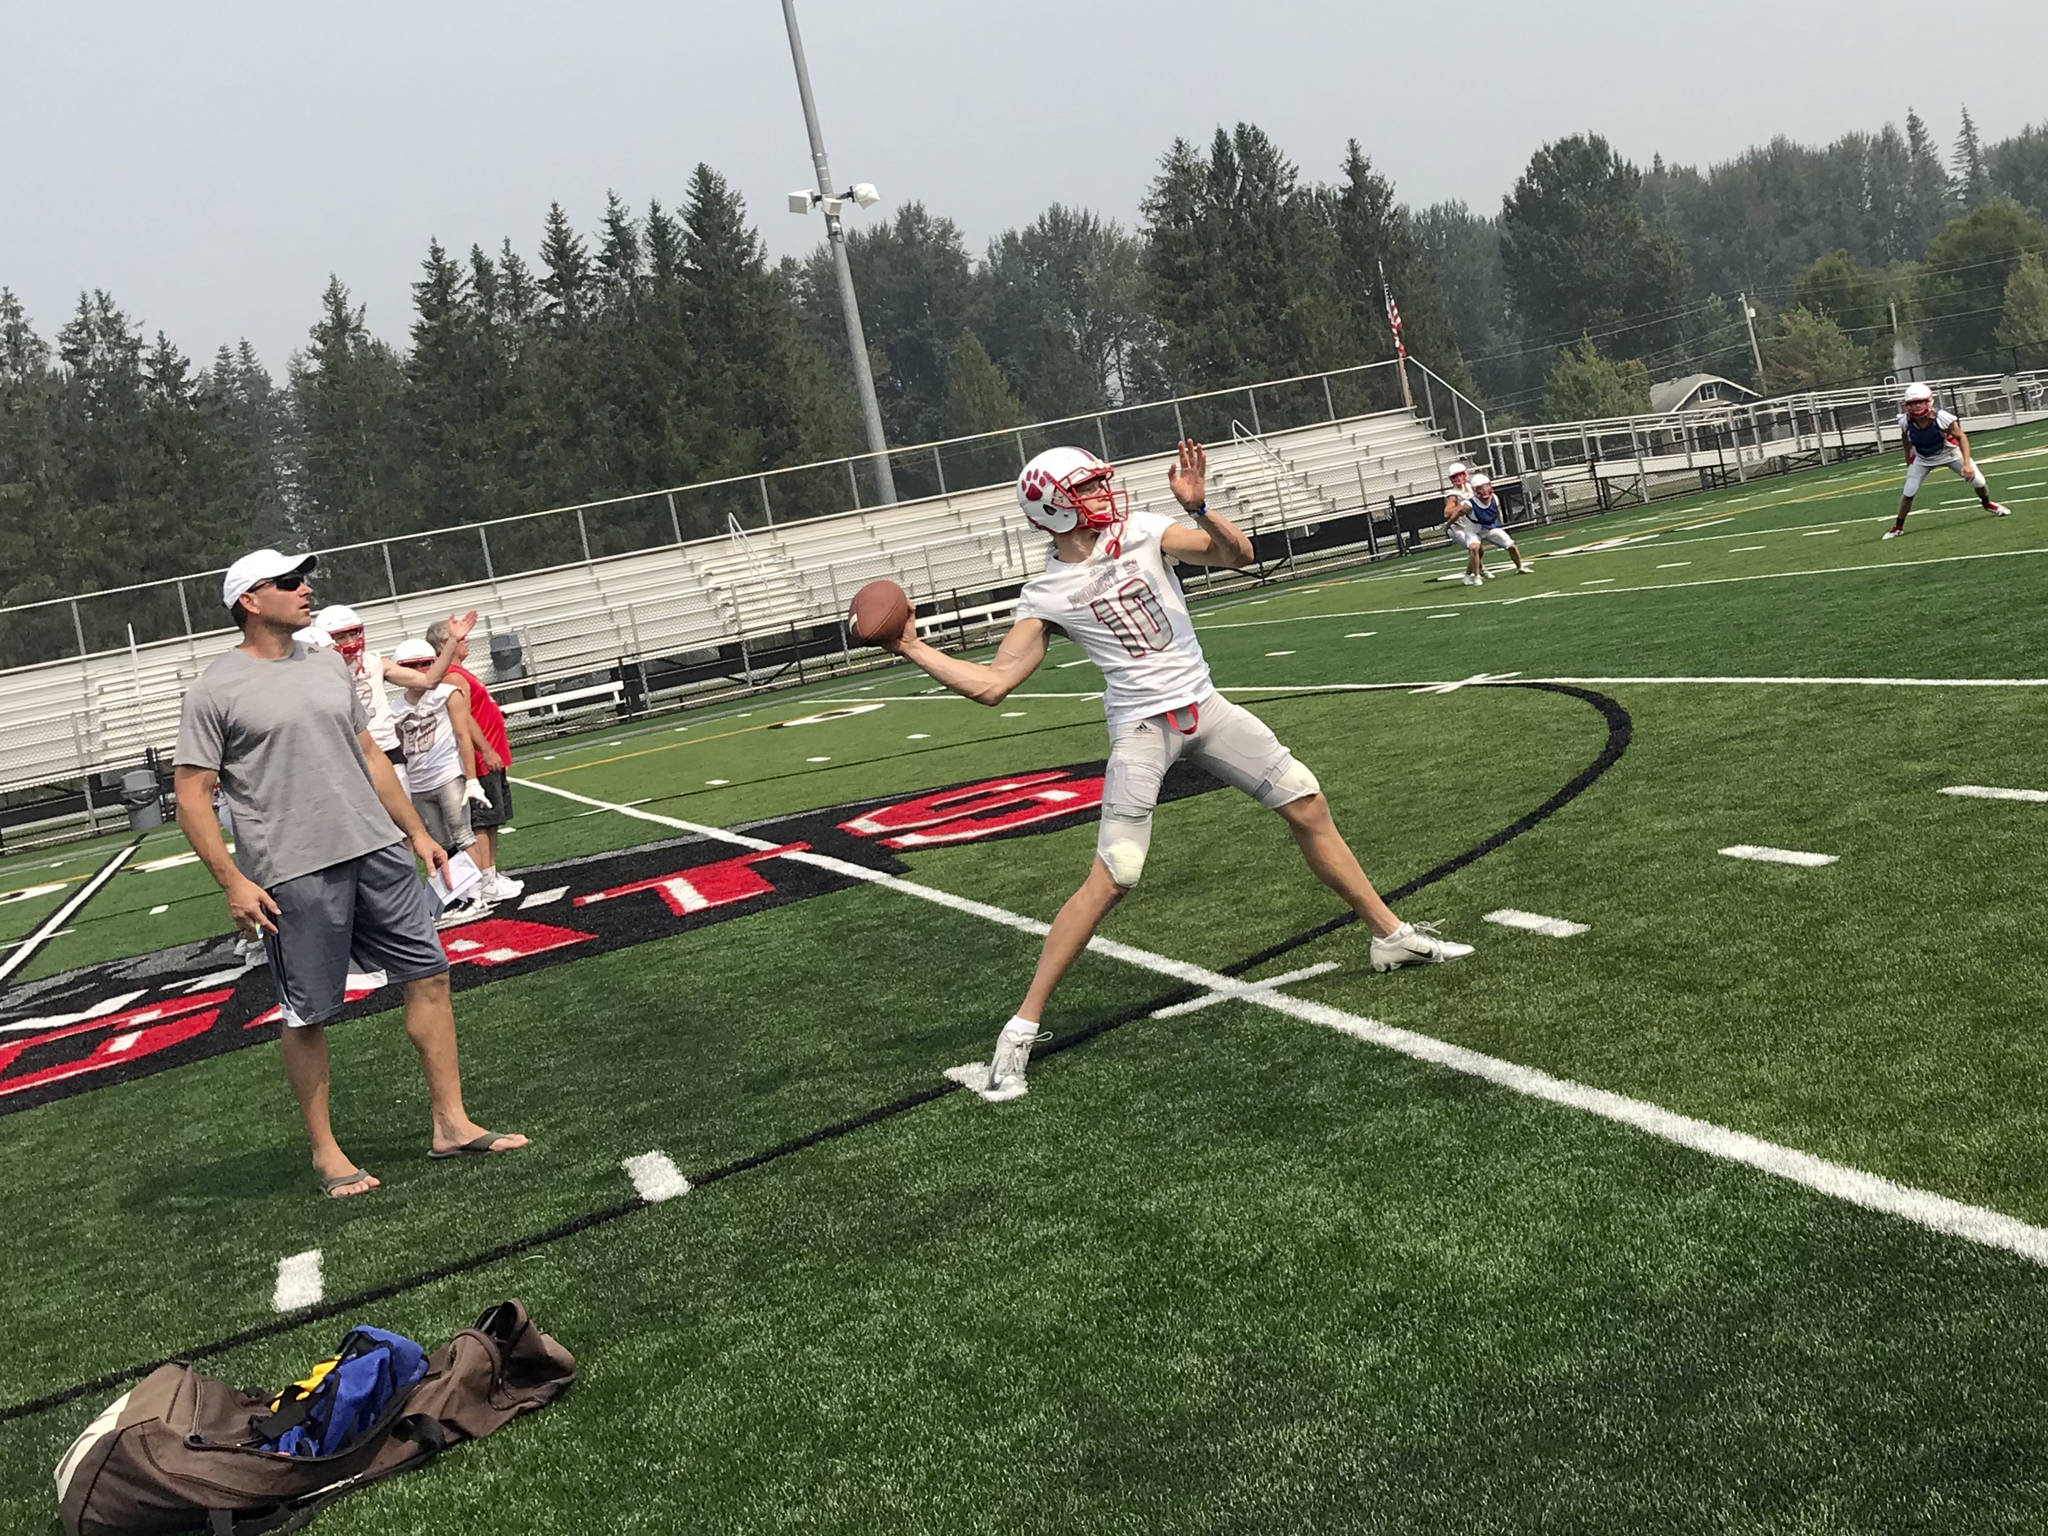 Mount Si Wildcats senior quarterback Cale Millen, center, unleashes pass deep down the right sideline on the first day of practice on Aug. 15. Millen will play college football at the University of Oregon next year. Shaun Scott/staff photo